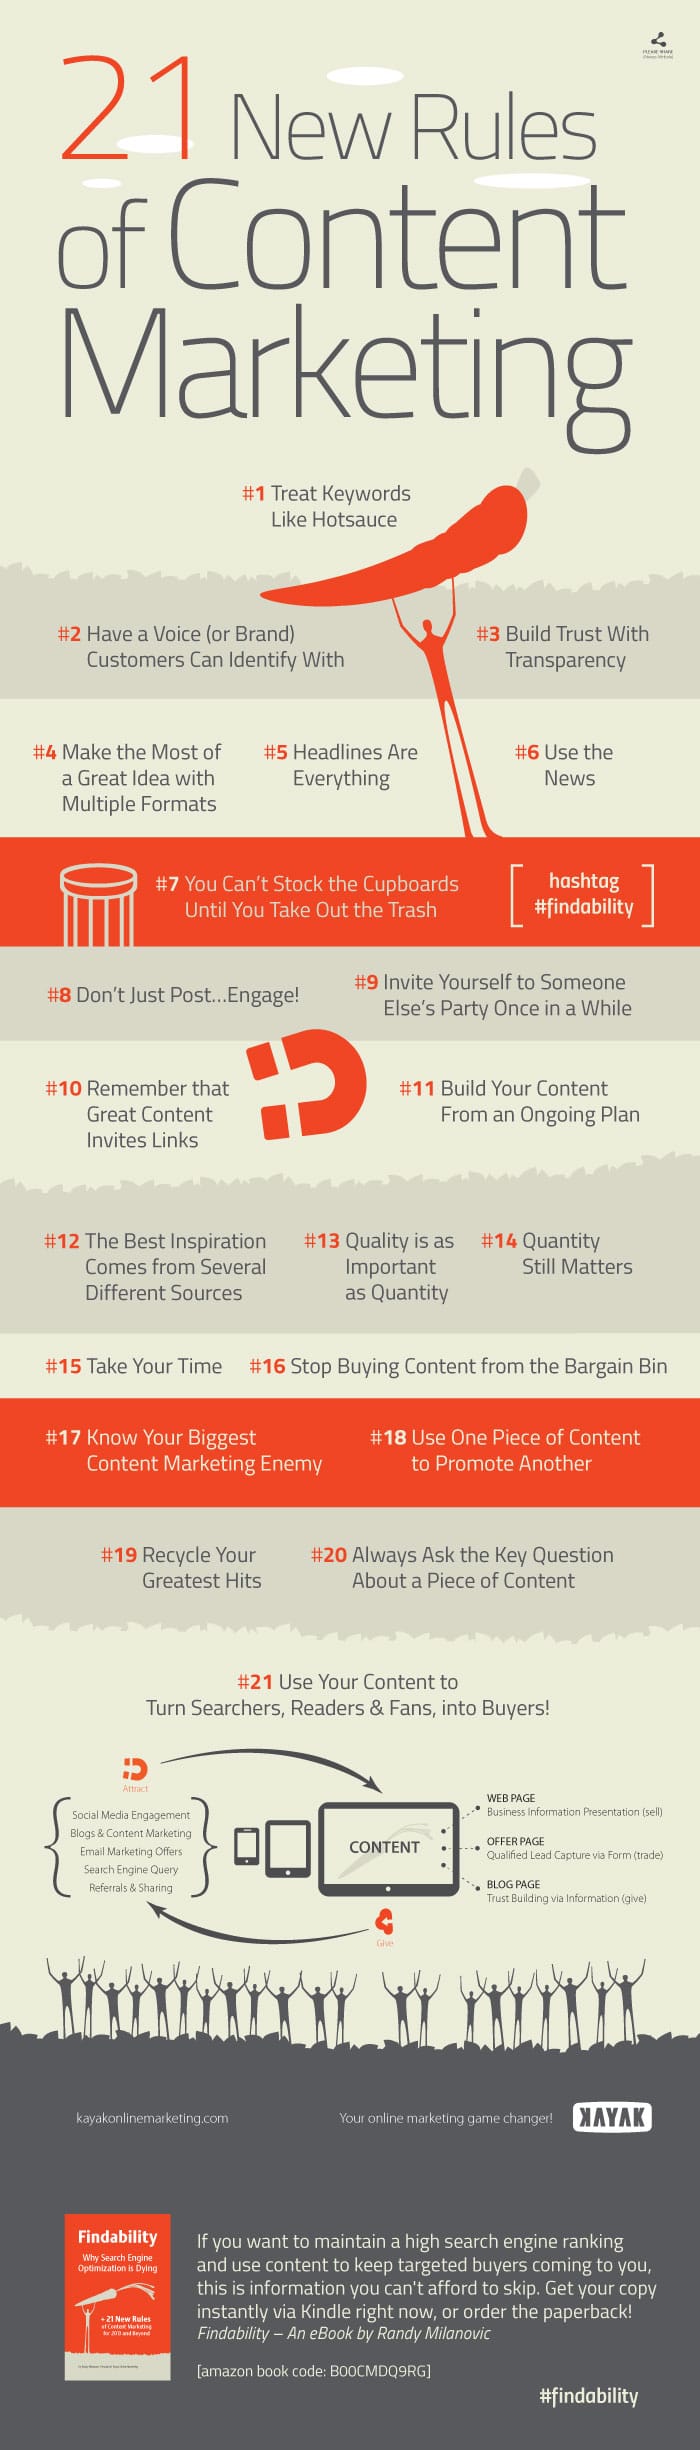 21 Content Marketing Rules Infographic